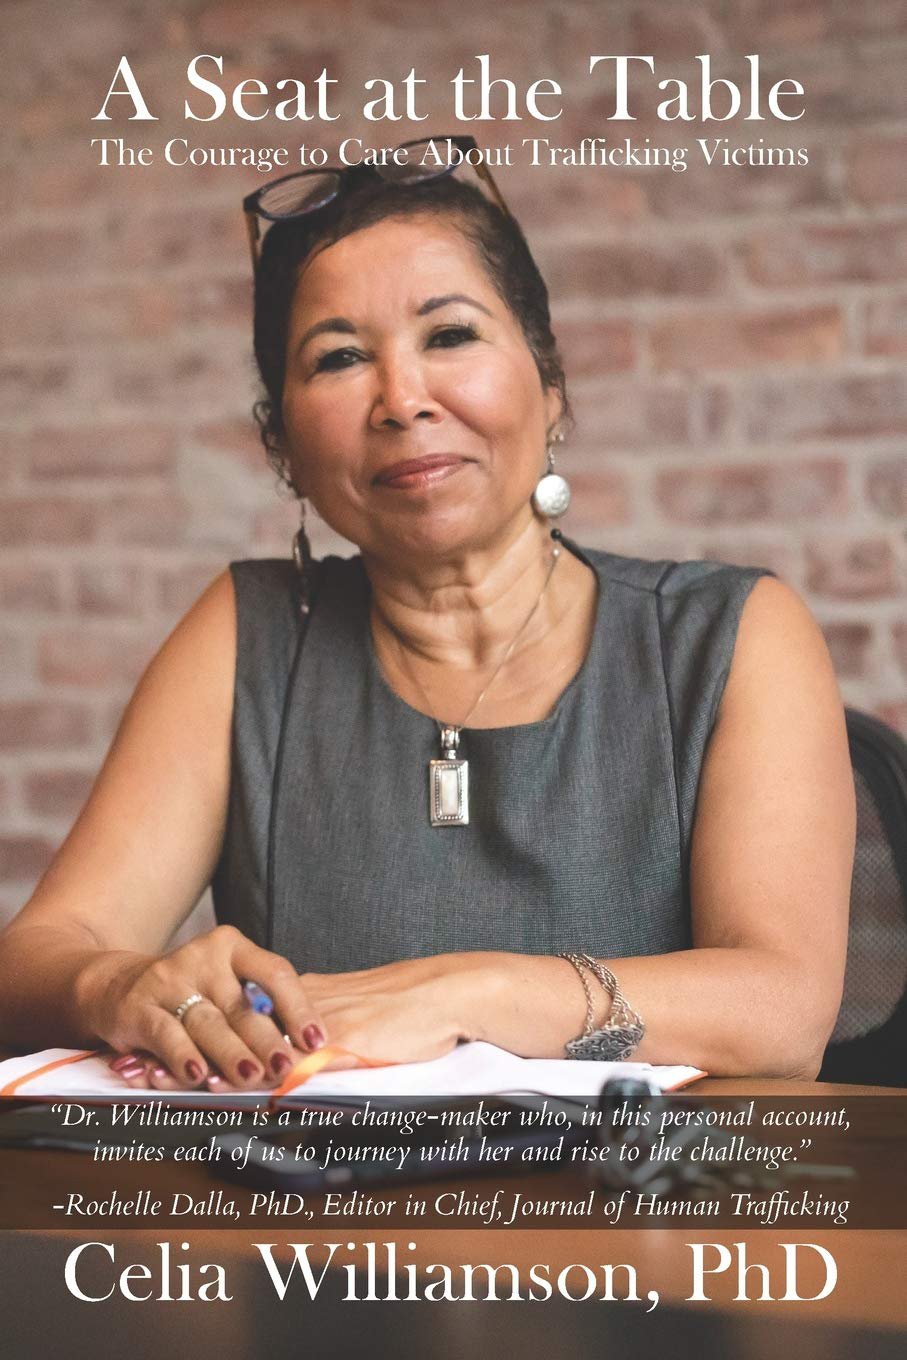 Celia Williamson, author of "A Seat at the Table: The Courage to Care About Trafficking Victims," will speak at 6 p.m. March 20 in Room 104 of the Academic Classroom Building, 1751 MTSU Blvd. on the campus of Middle Tennessee State University in Murfreesboro, Tenn. (Submitted photo)